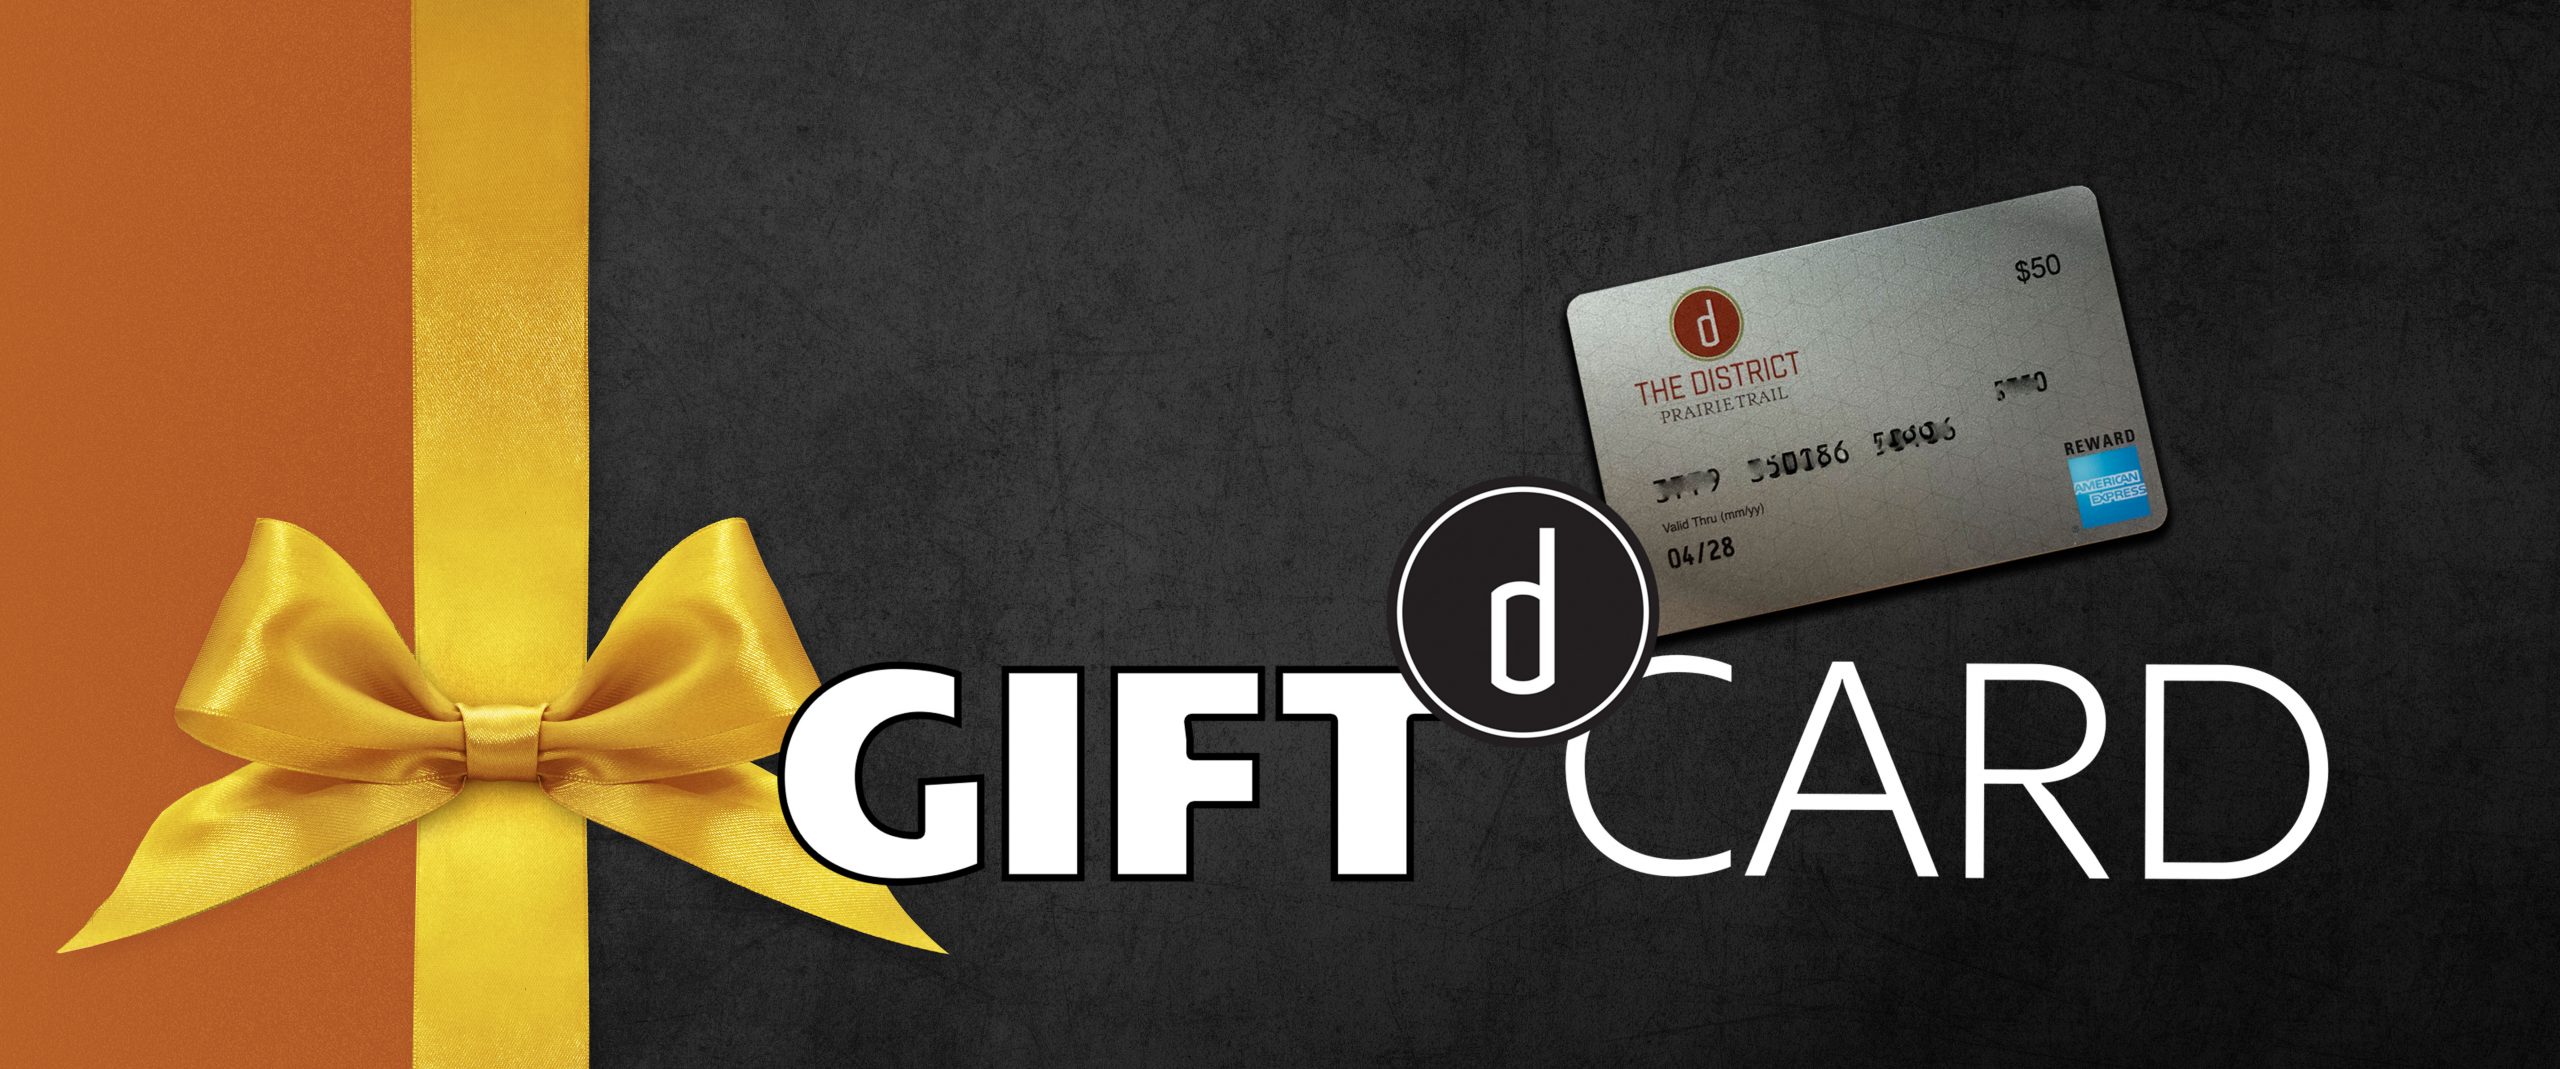 District Gift Card $50